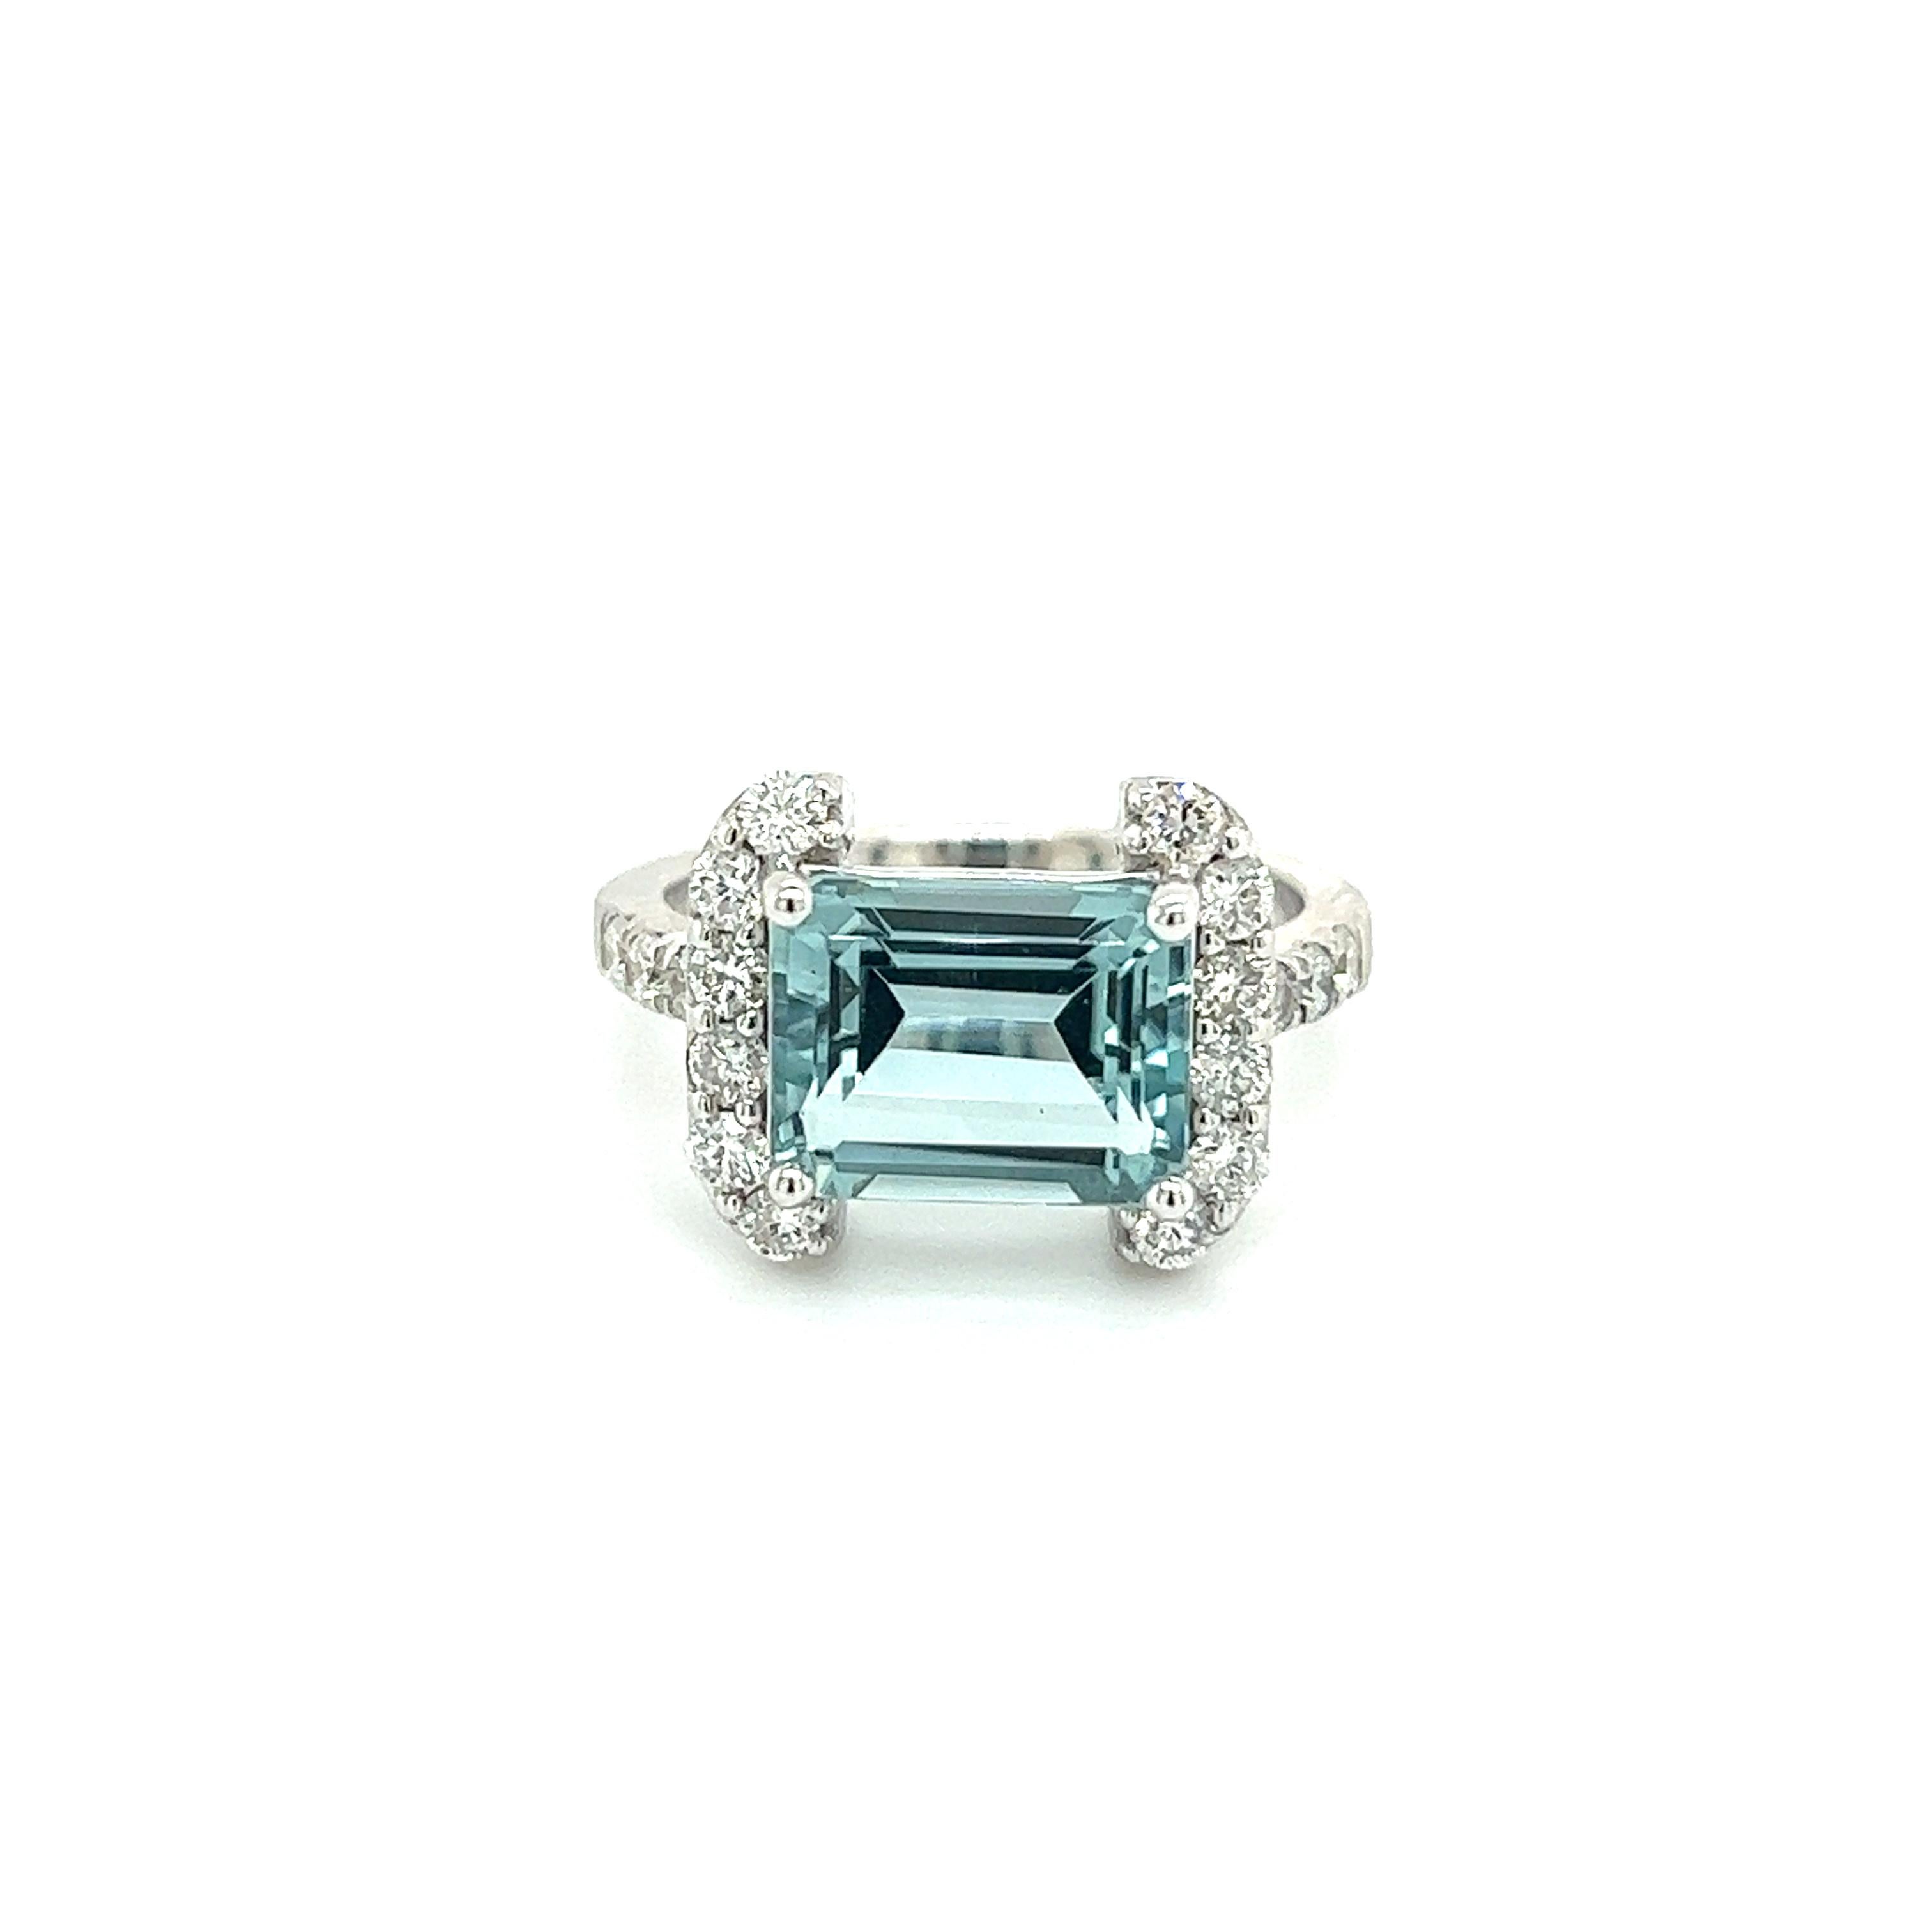 Natural Aquamarine Diamond Ring 6.5 14k white Gold 6.09 TCW Certified In New Condition For Sale In Brooklyn, NY